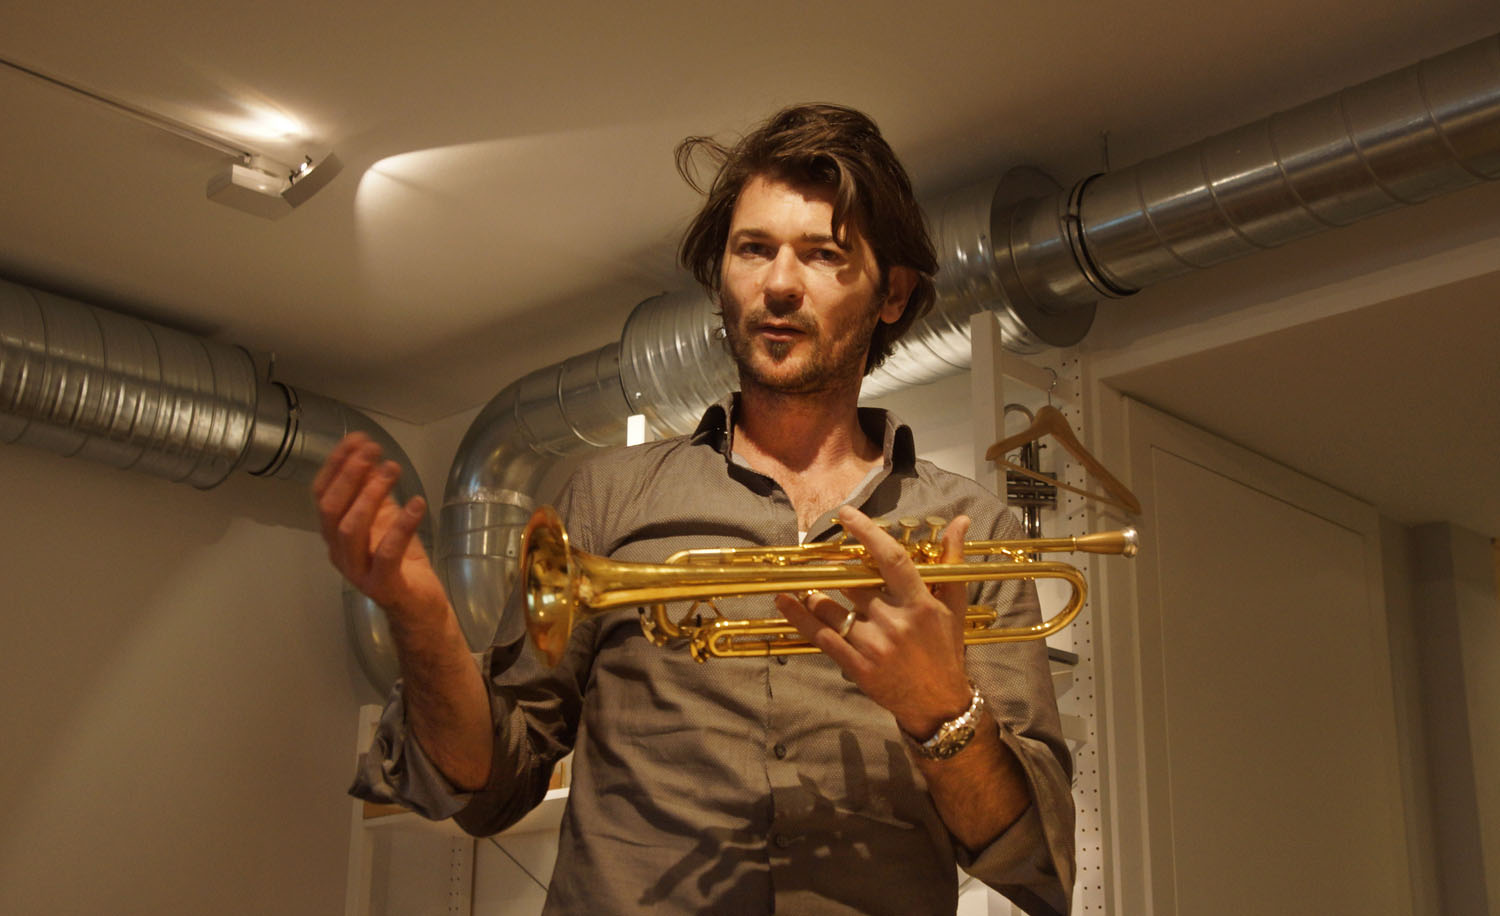 TrumpetScout_Interview Roman Rindberger_2